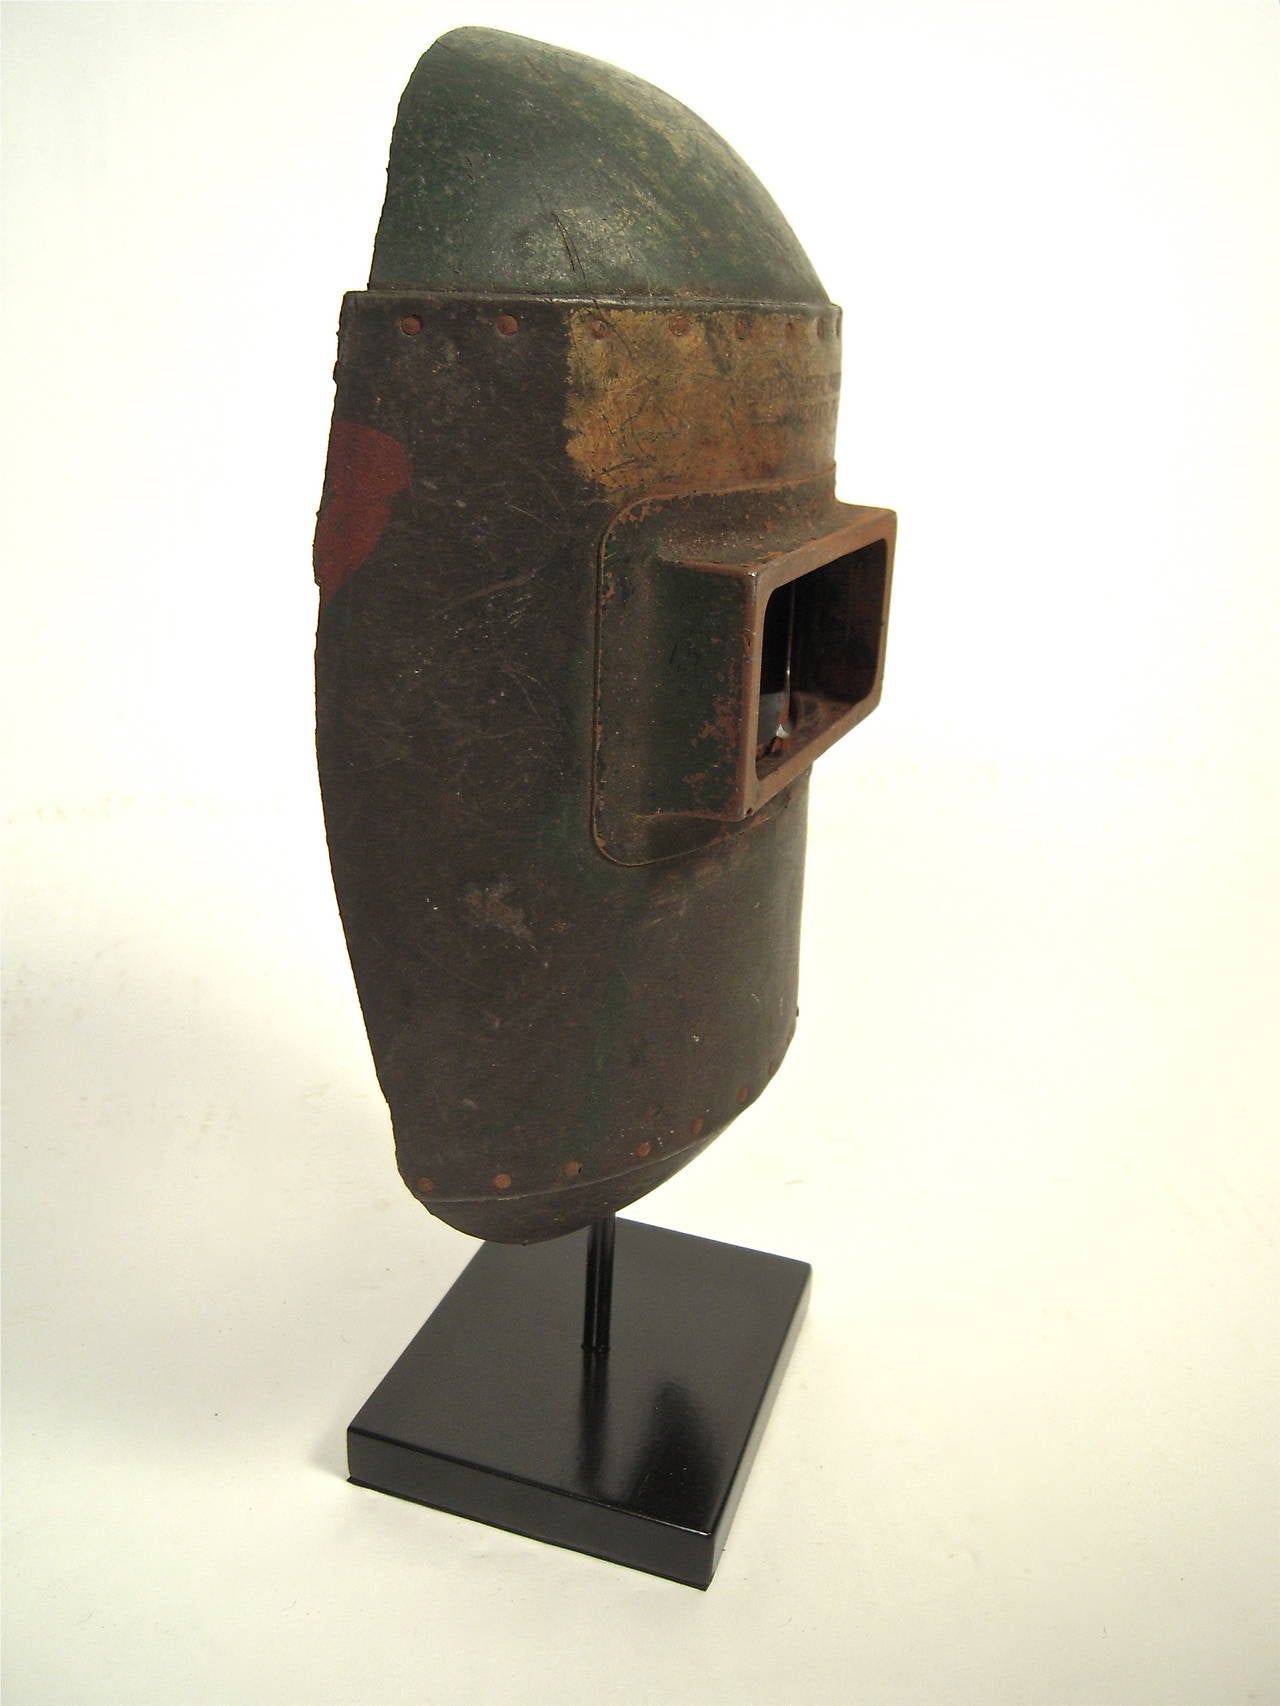 A sculptural, Industrial welder's mask on stand, American, circa 1920s, in olive green painted fiber board and metal with the manufacturer's name in block letters above the eye opening: "The Fiber Metal Products Company, Chester, PA".